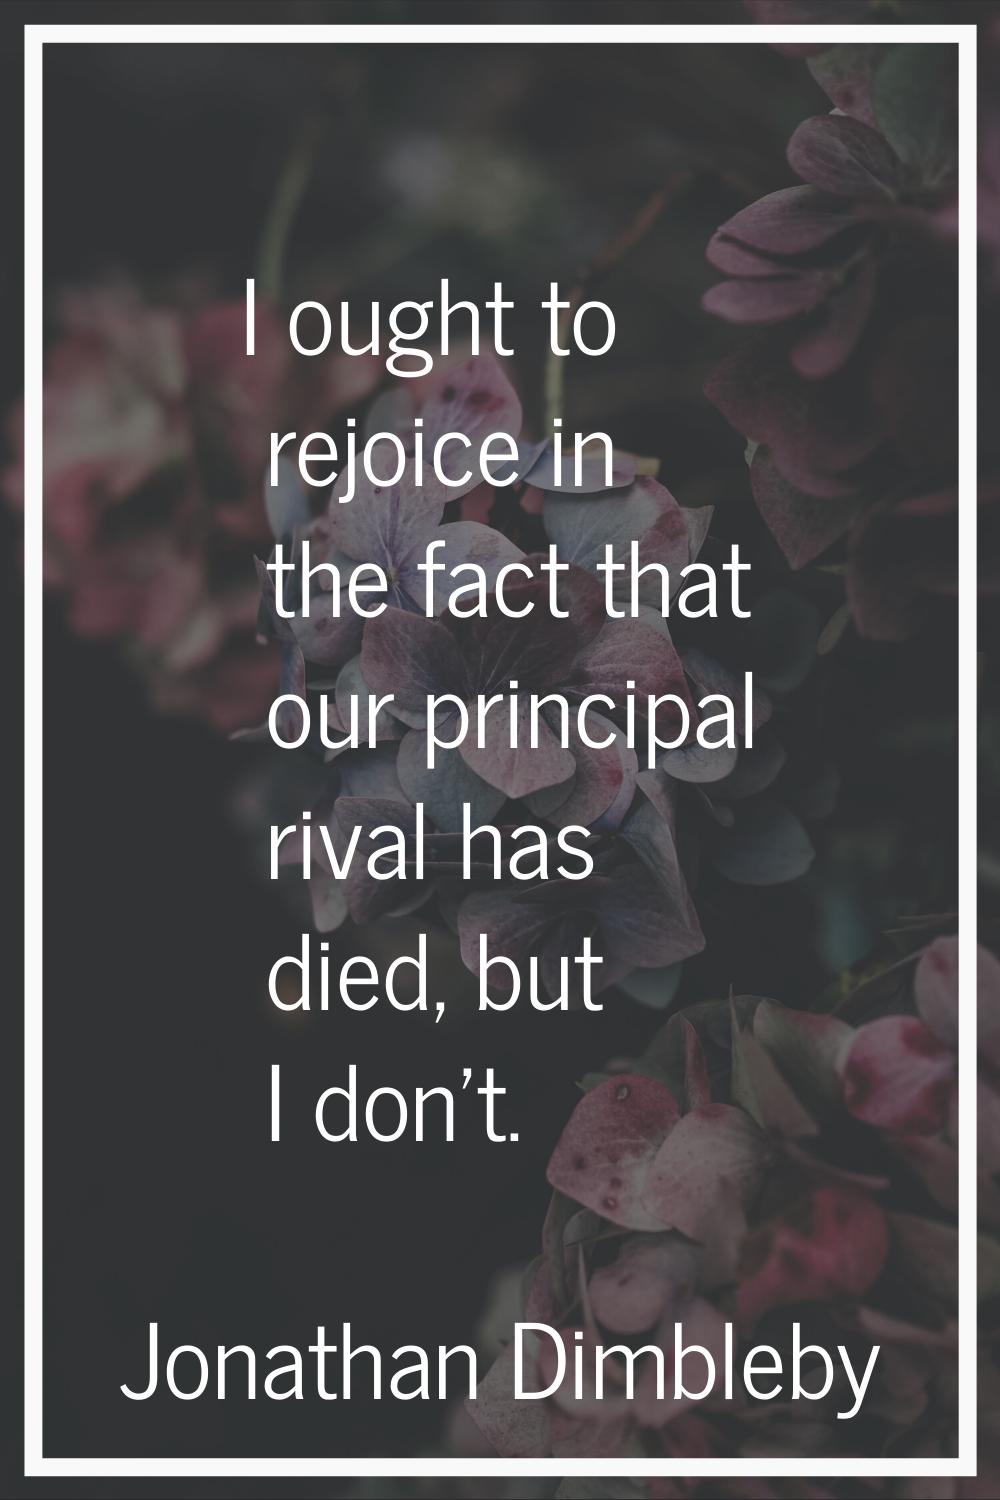 I ought to rejoice in the fact that our principal rival has died, but I don't.